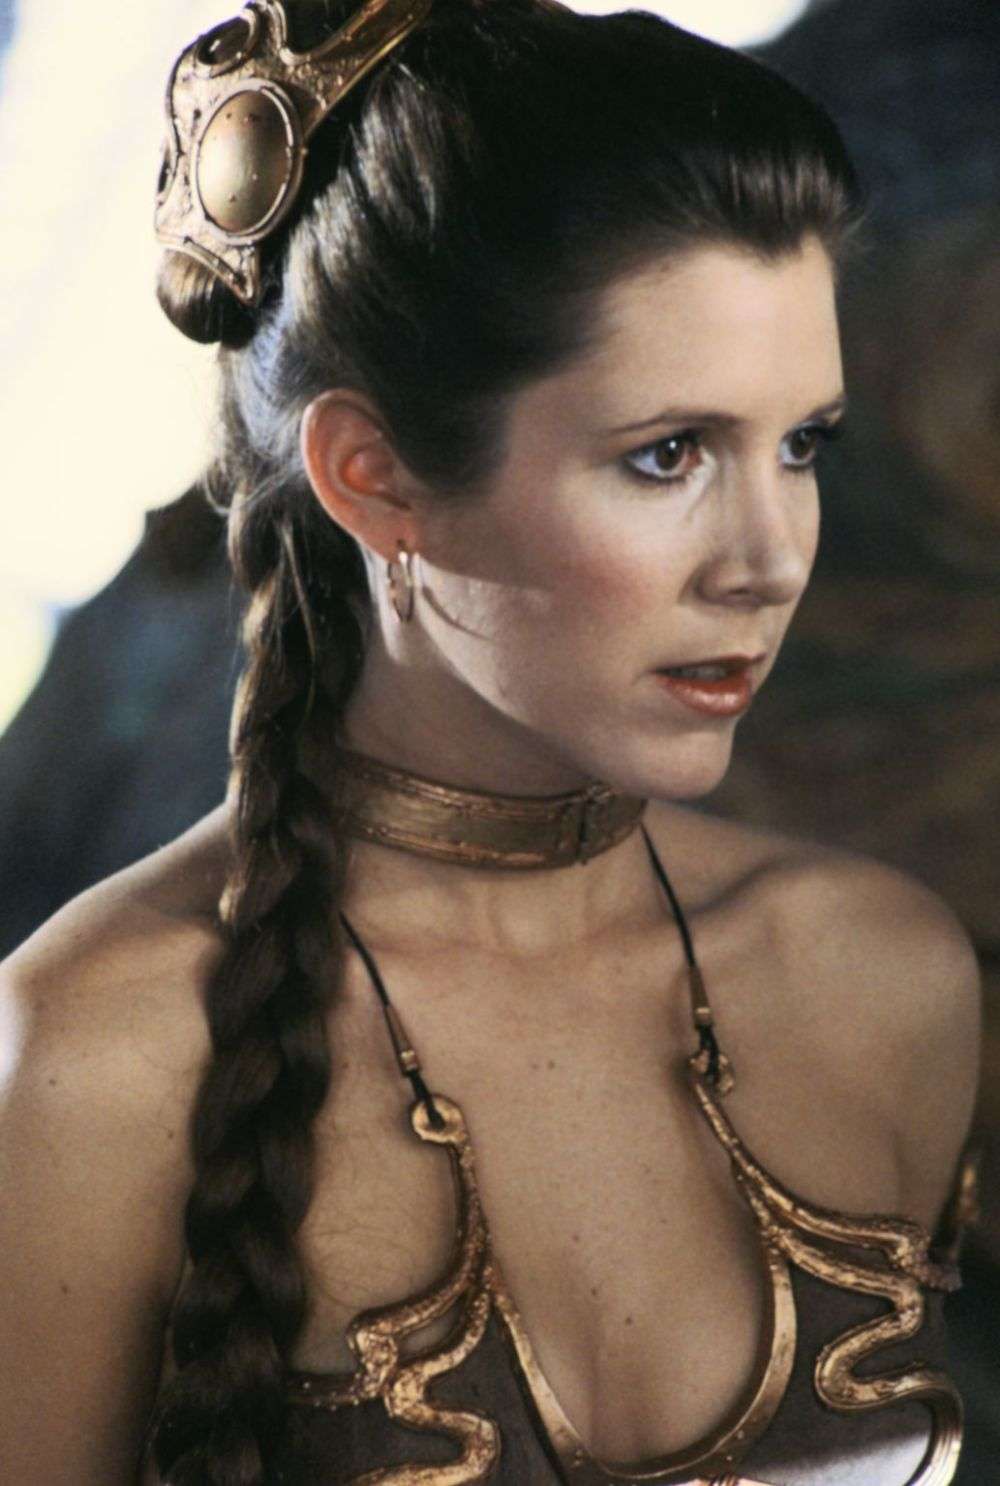 Sexy Slave Princess Leia Boobs Pictures Which Will Cause You To Surrender To Her